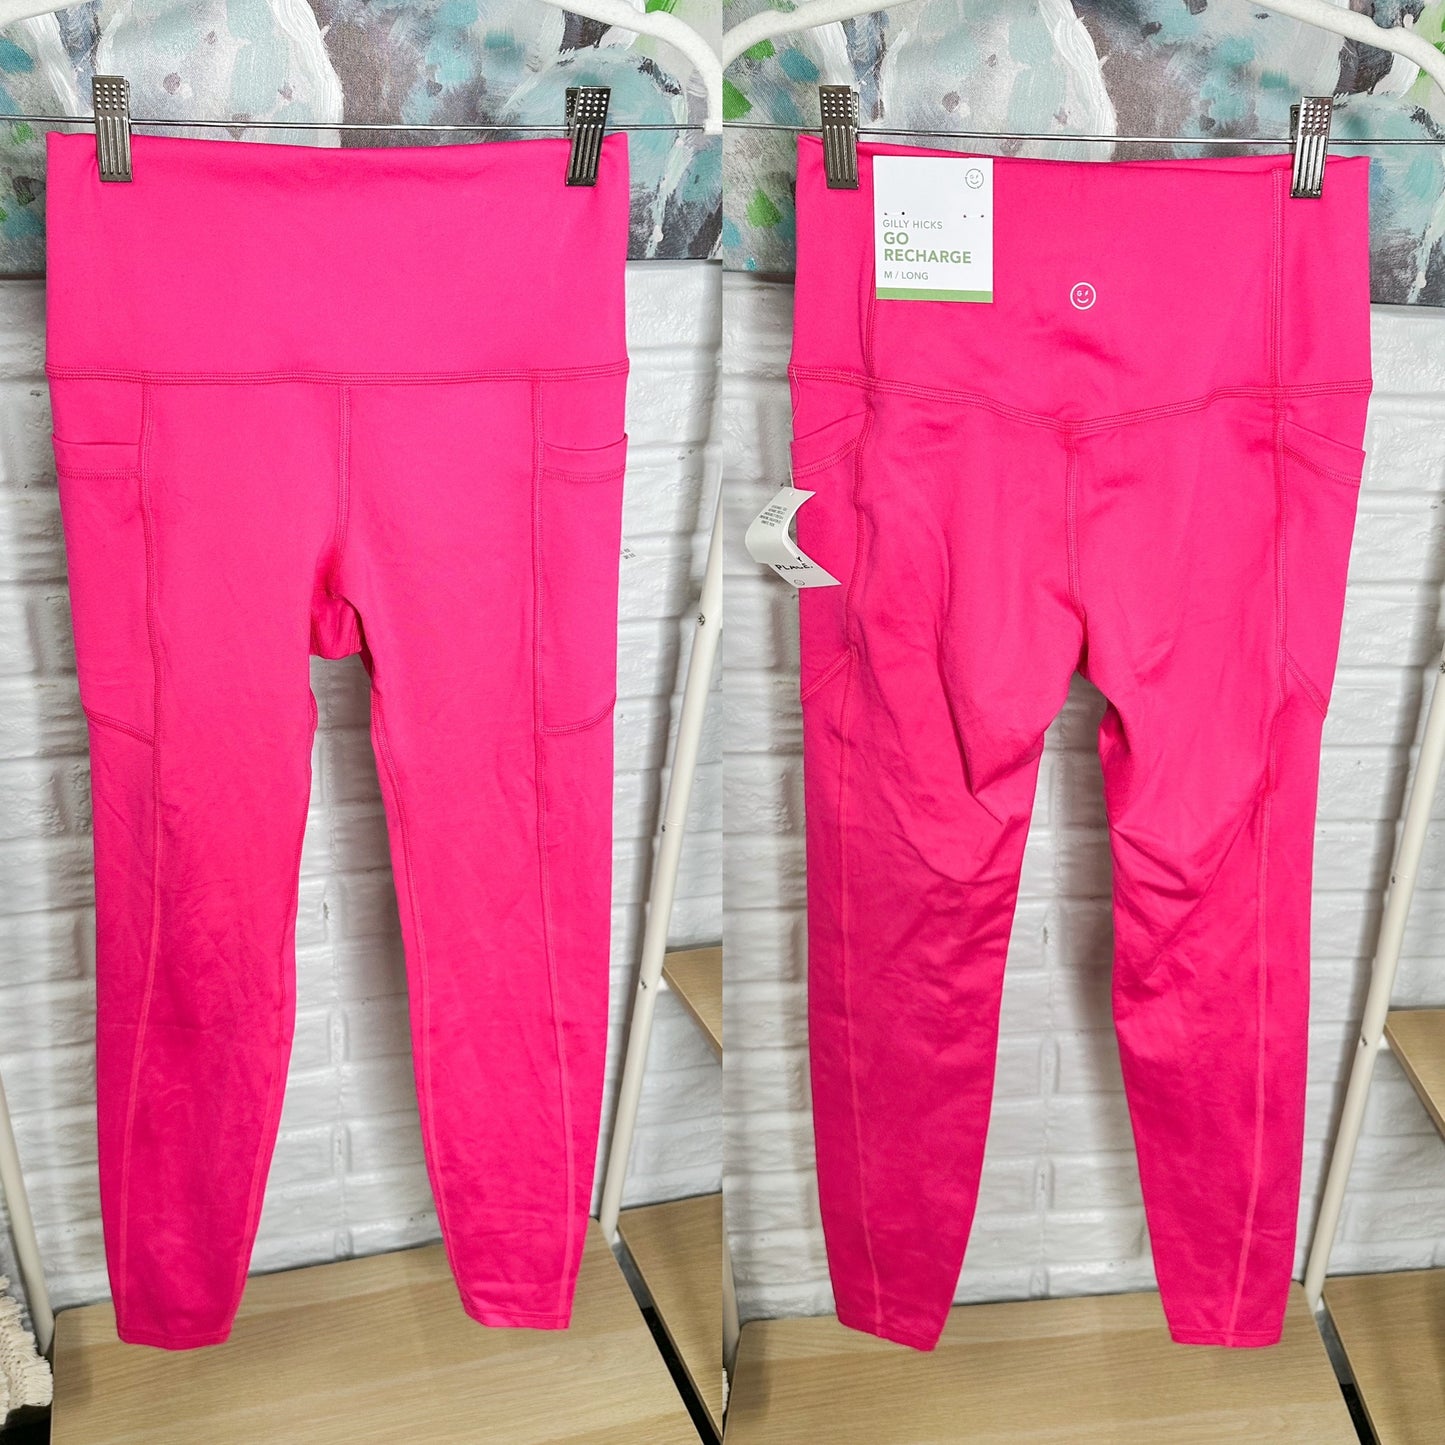 Hollister Gilly Hicks New Pink Recharge High Rise Leggings Size Medium Long